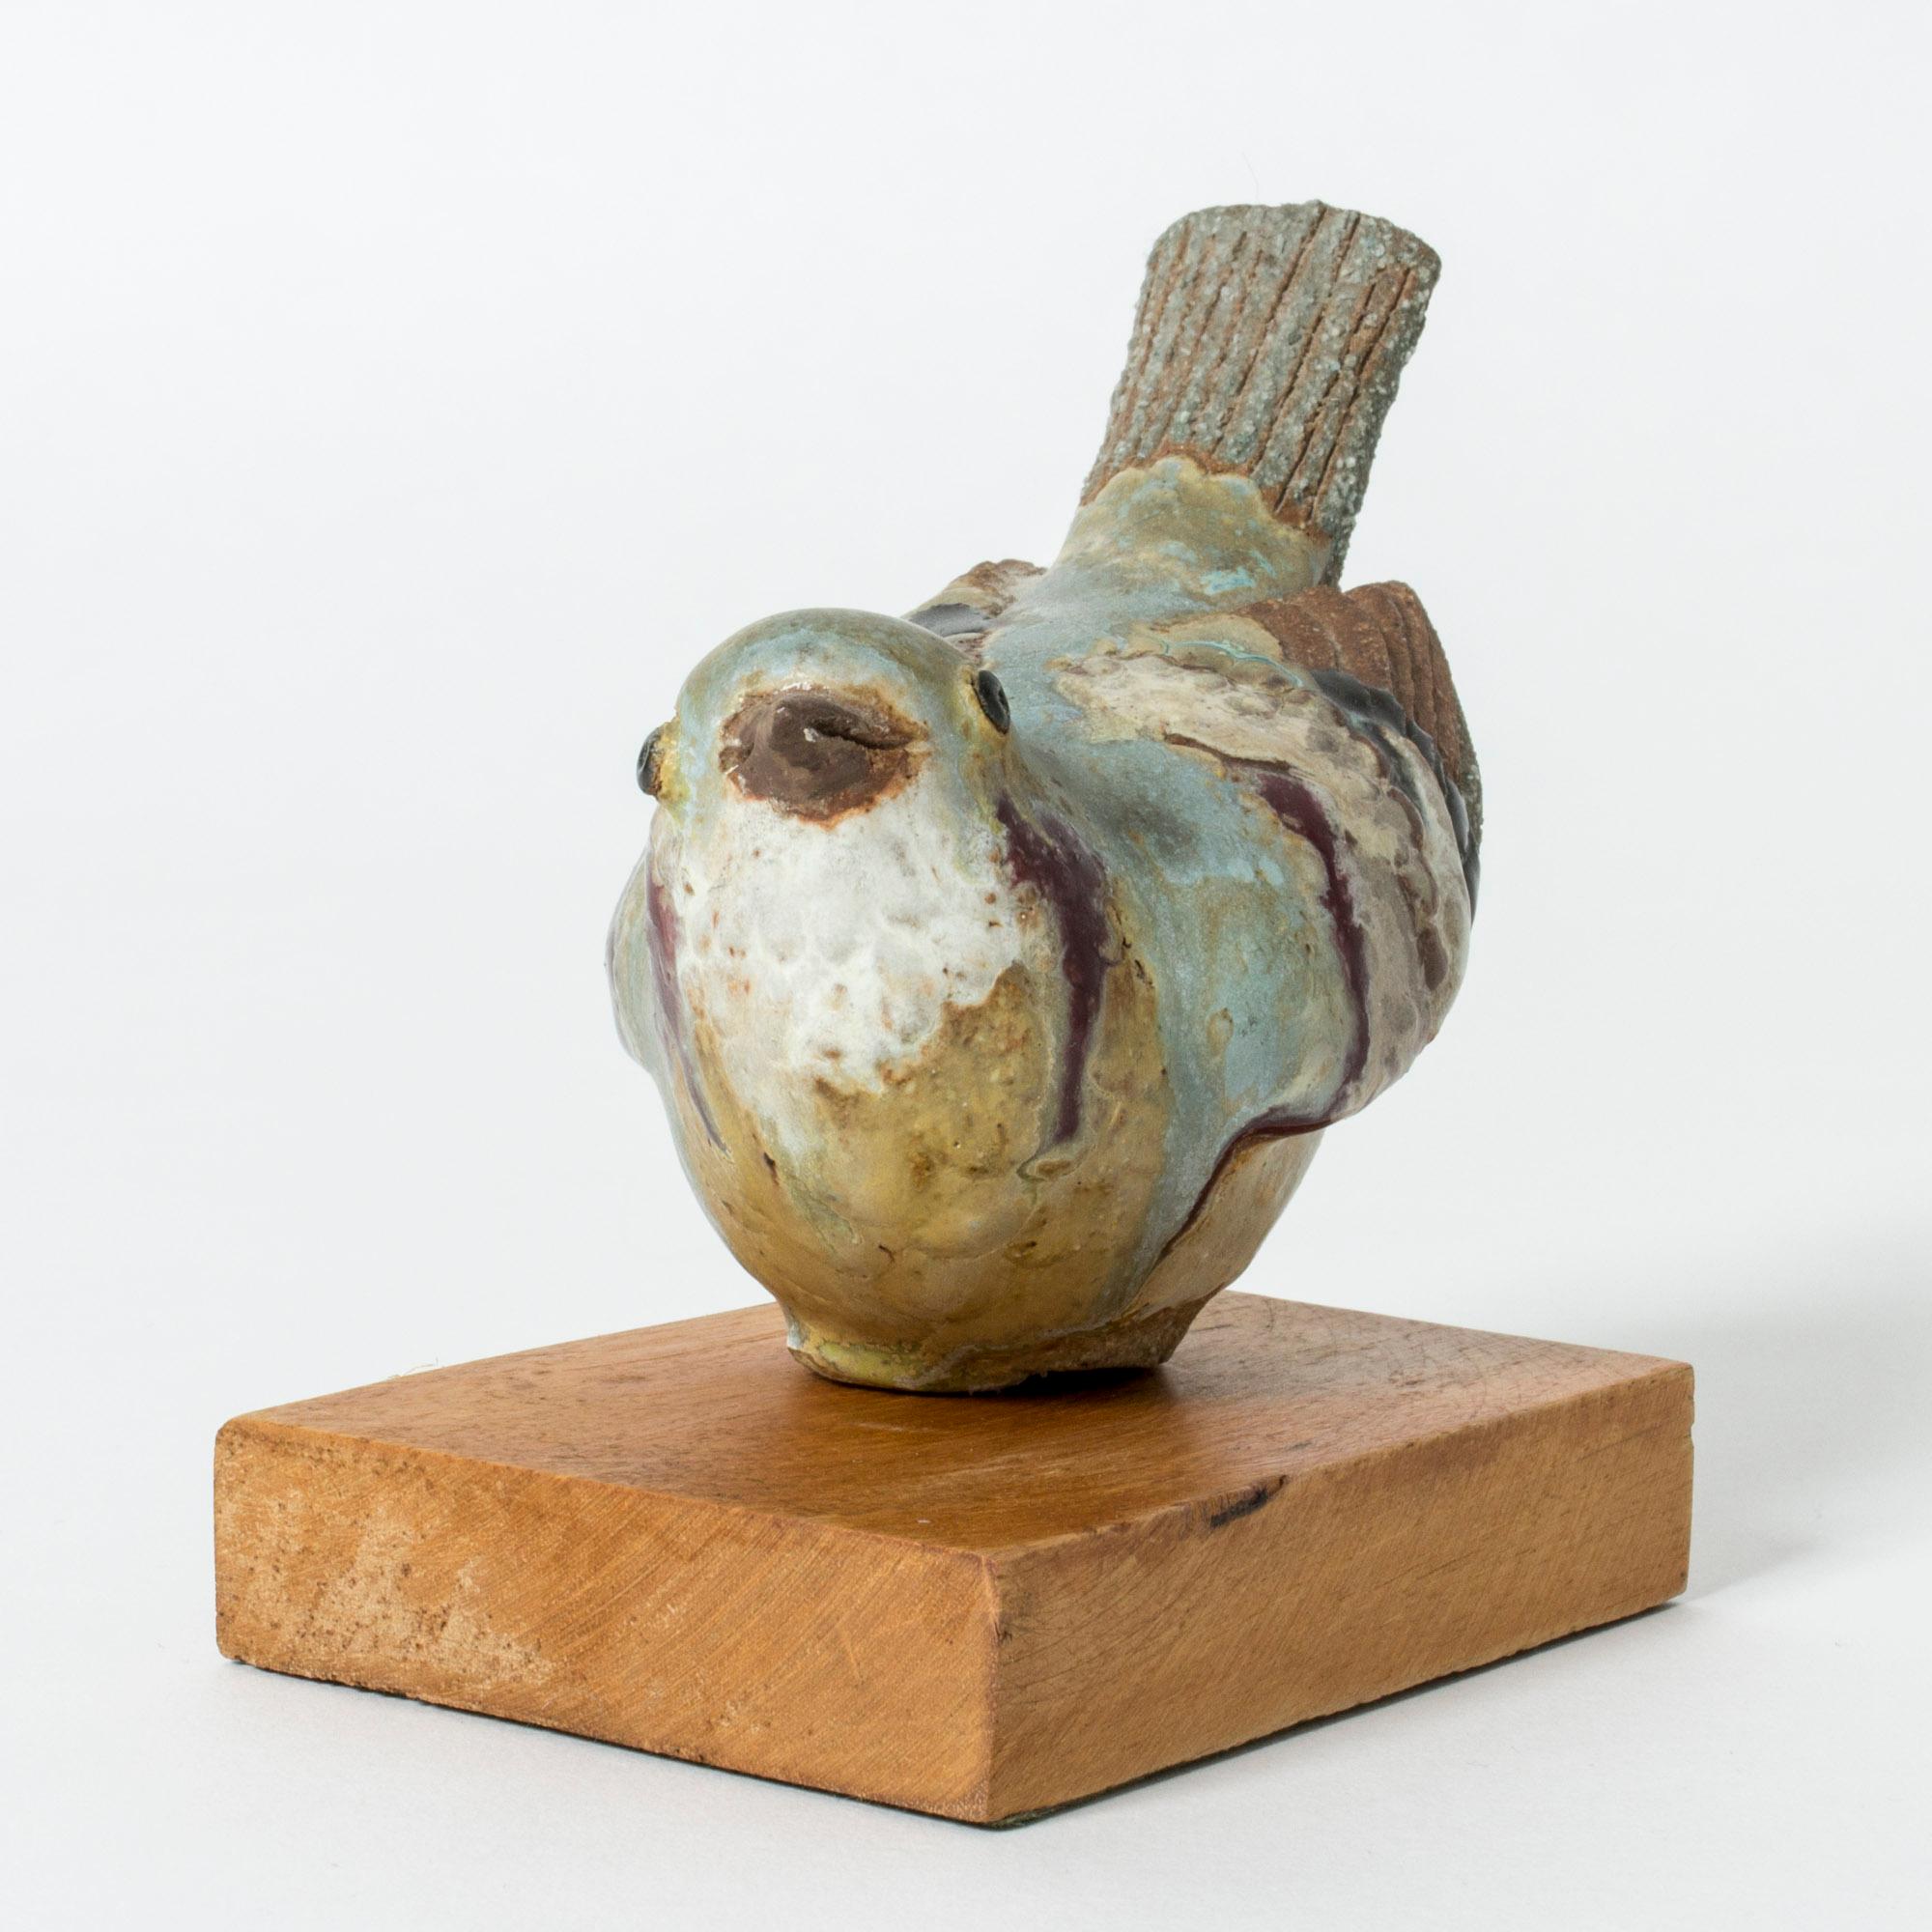 Lovely stoneware figurine by Tyra Lundgren in the form of a small bird. Intense and sensitive expression. Unglazed areas contrast with the thick, nature colored glazes that have flowed into the pattern of the feathers.